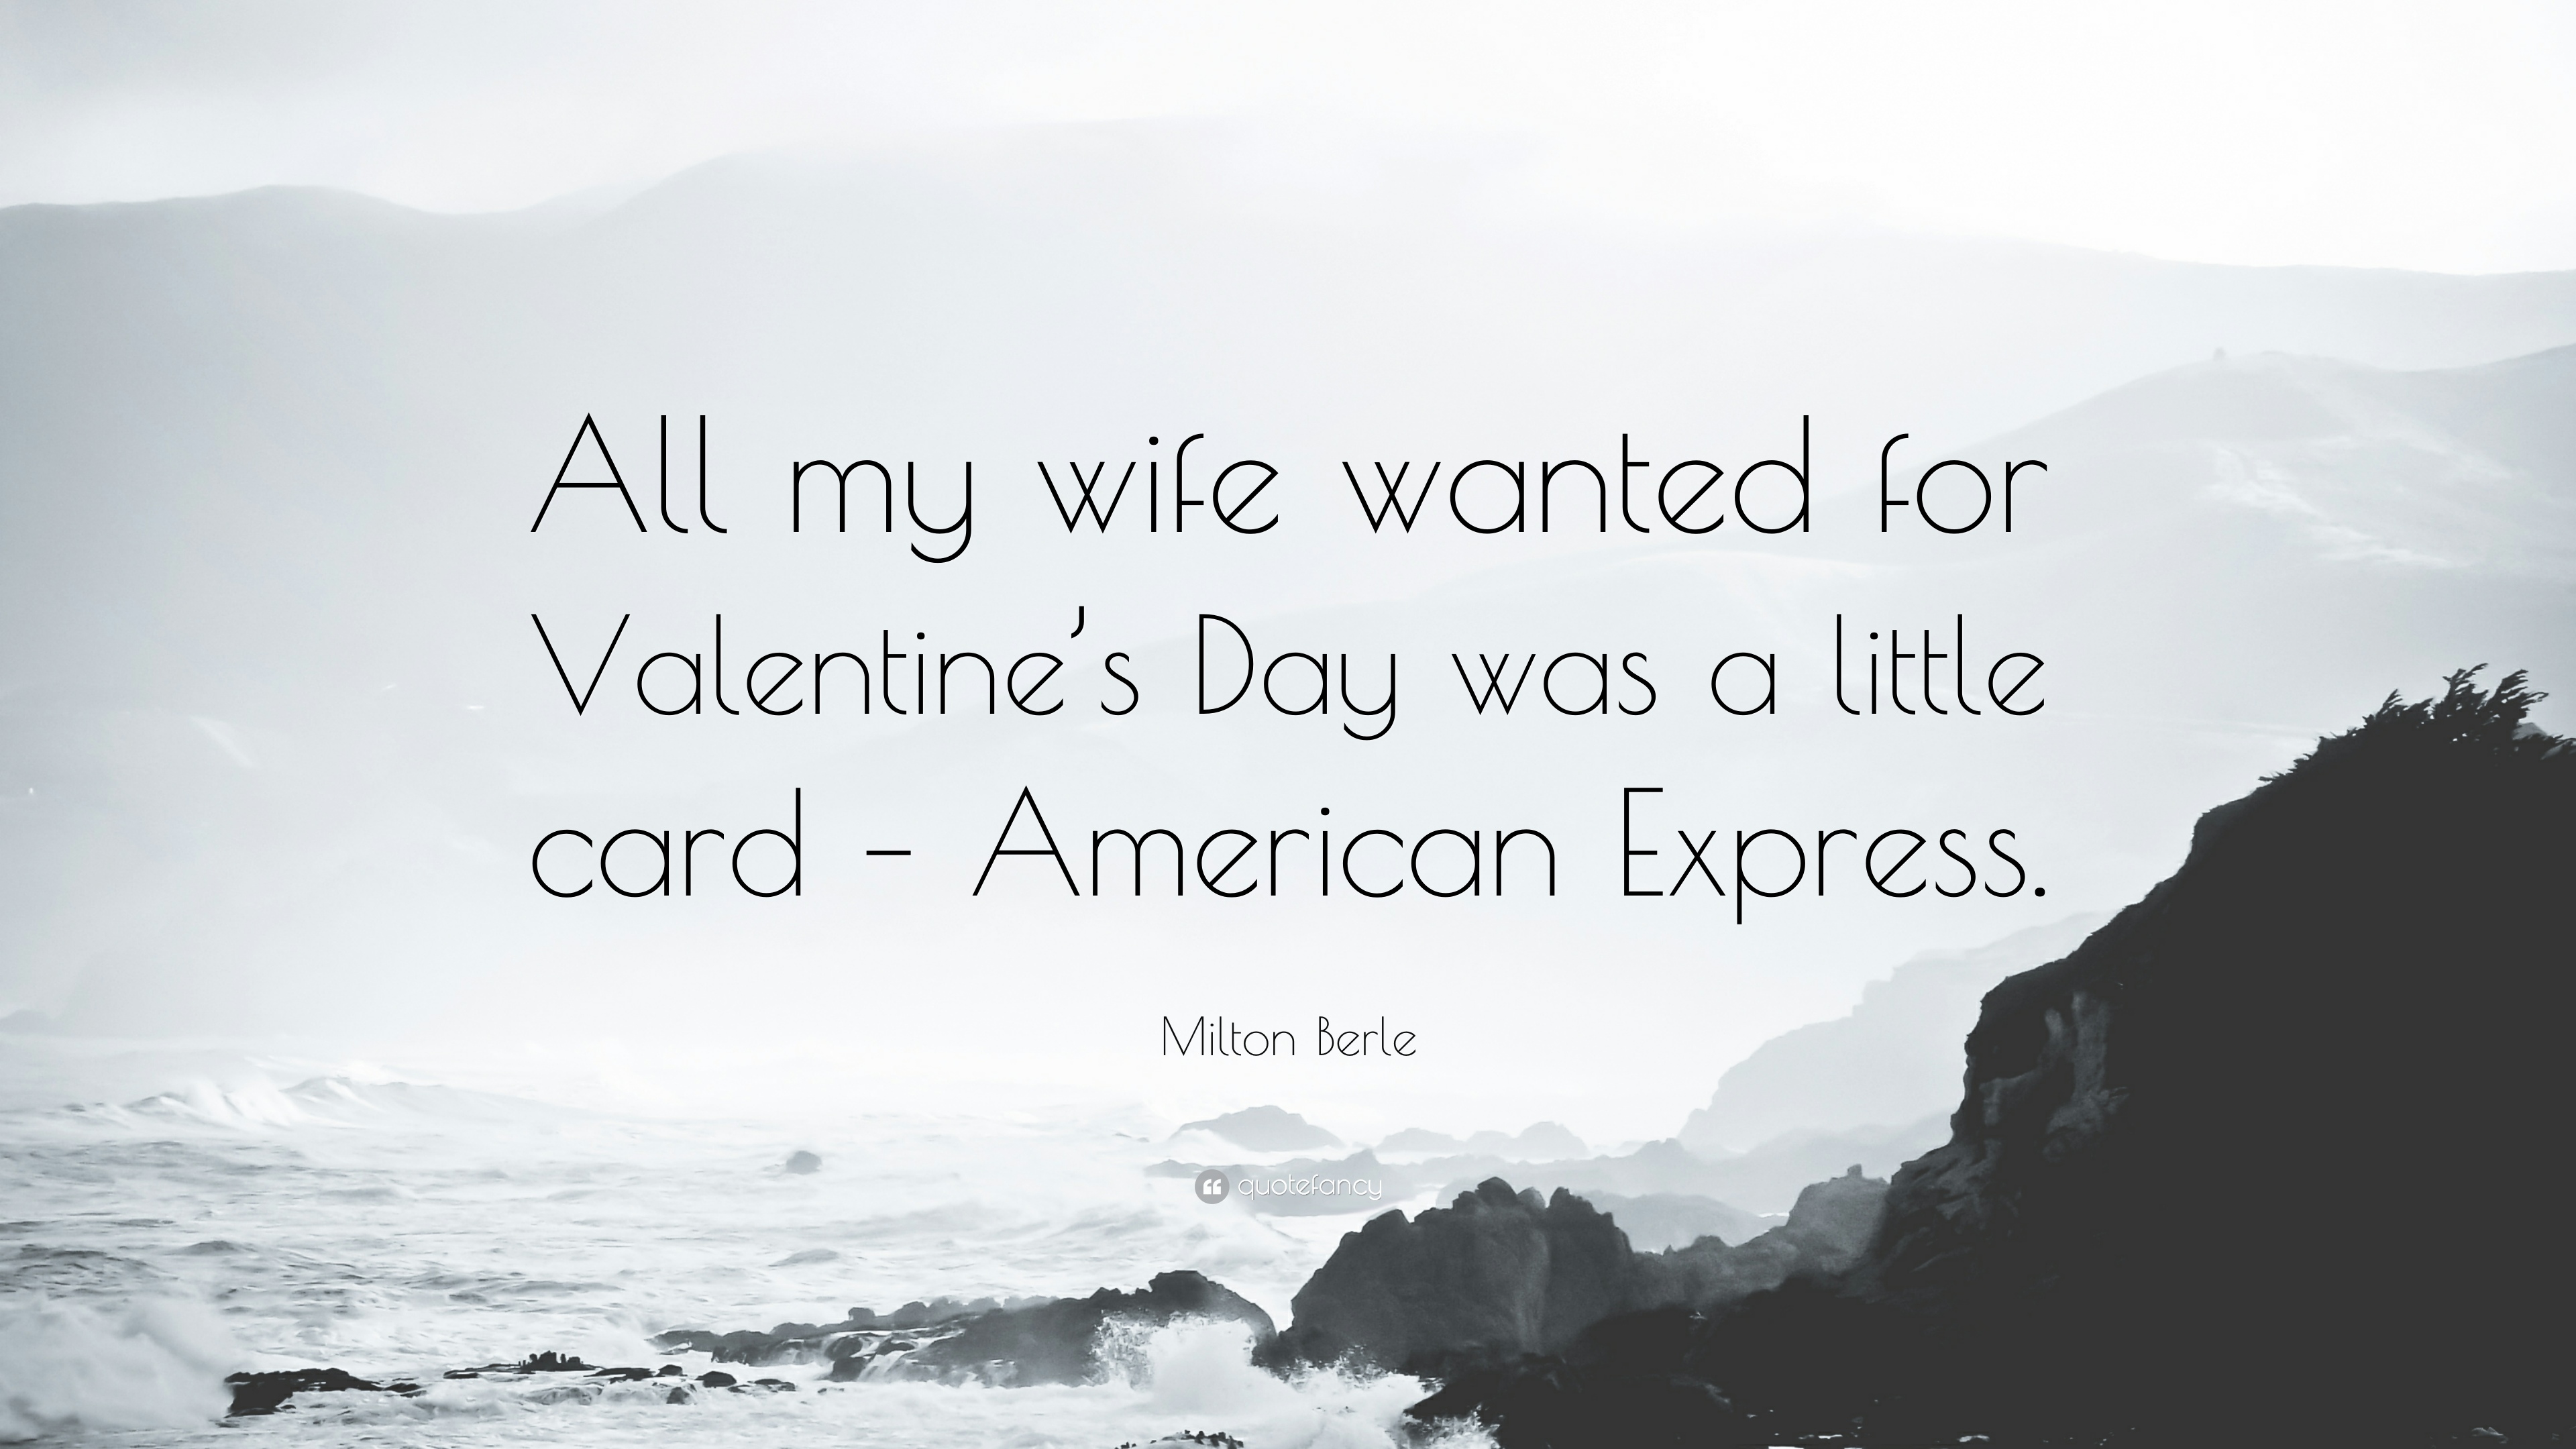 Milton Berle Quote: “All my wife wanted for Valentine's Day was a